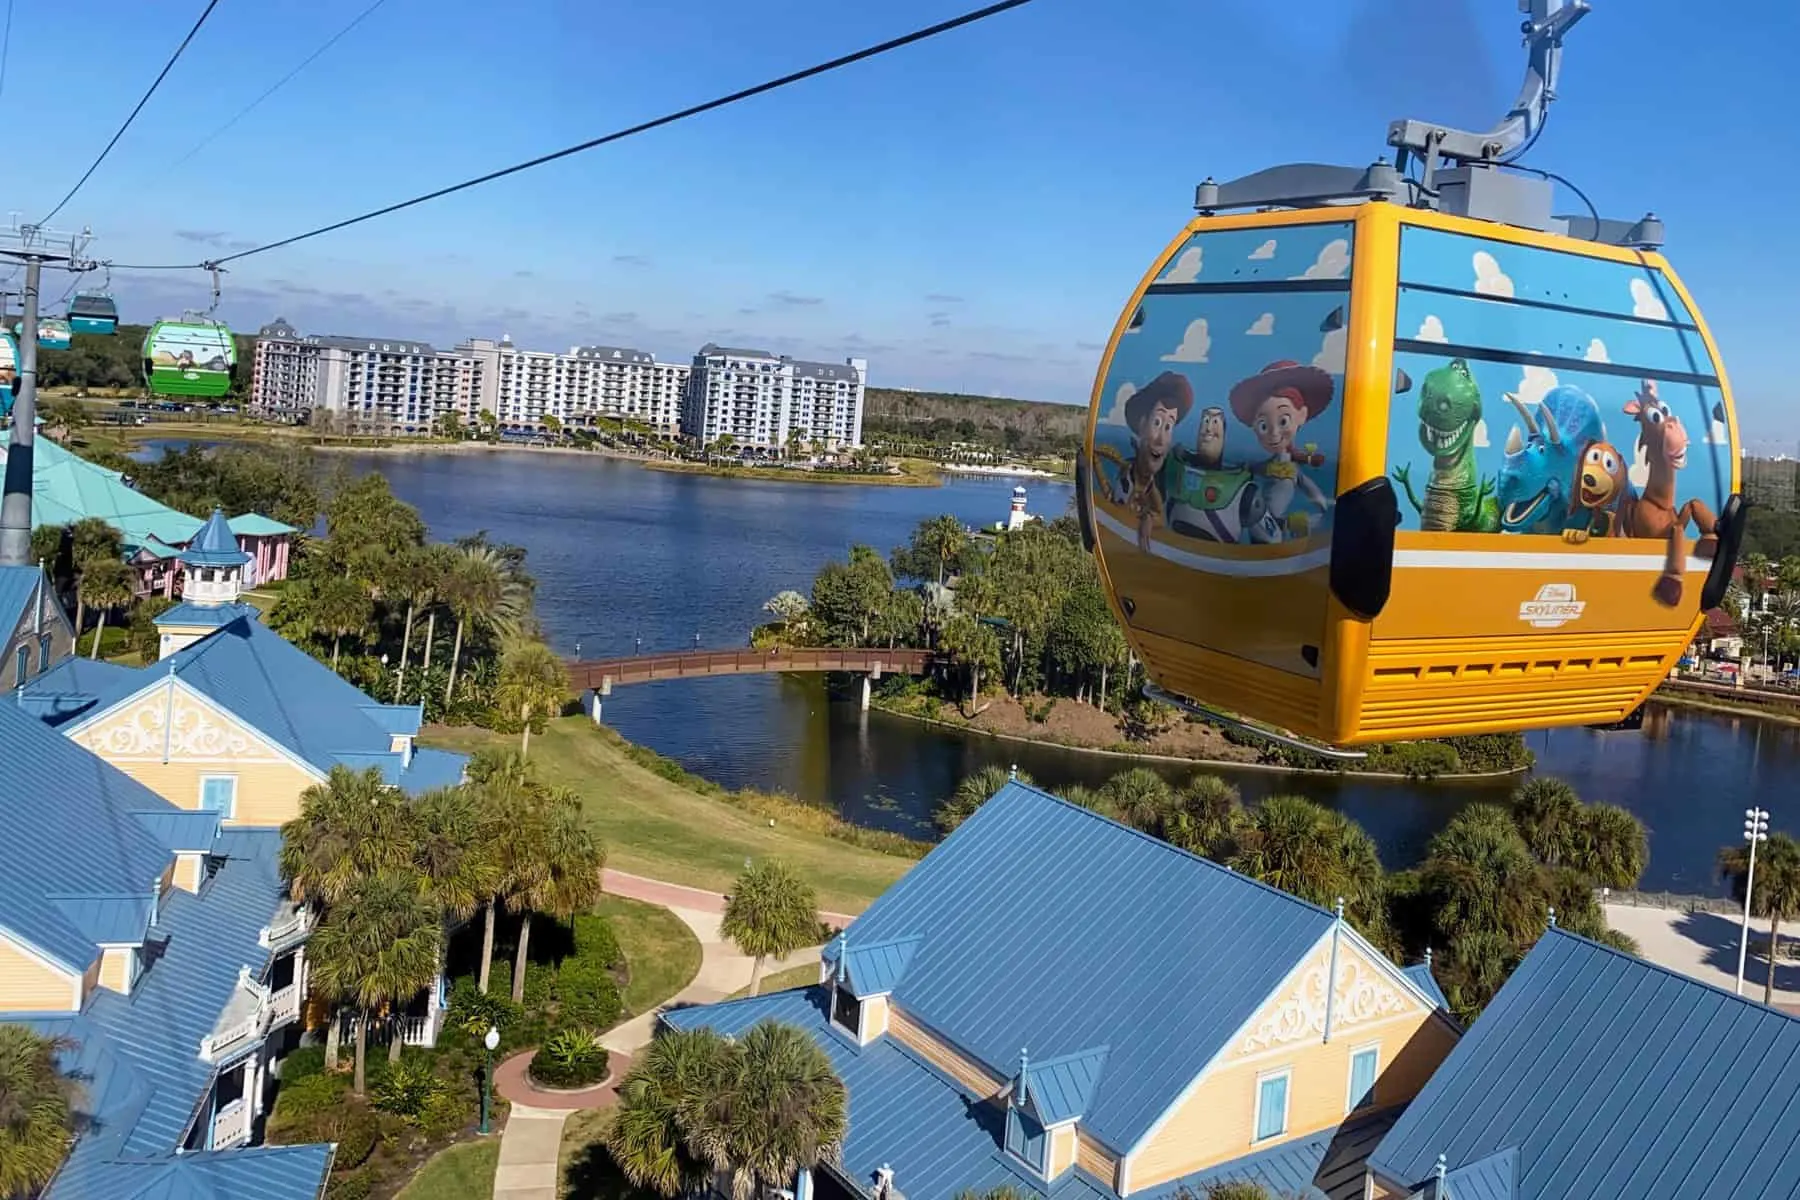 How early should you get to Skyliner?